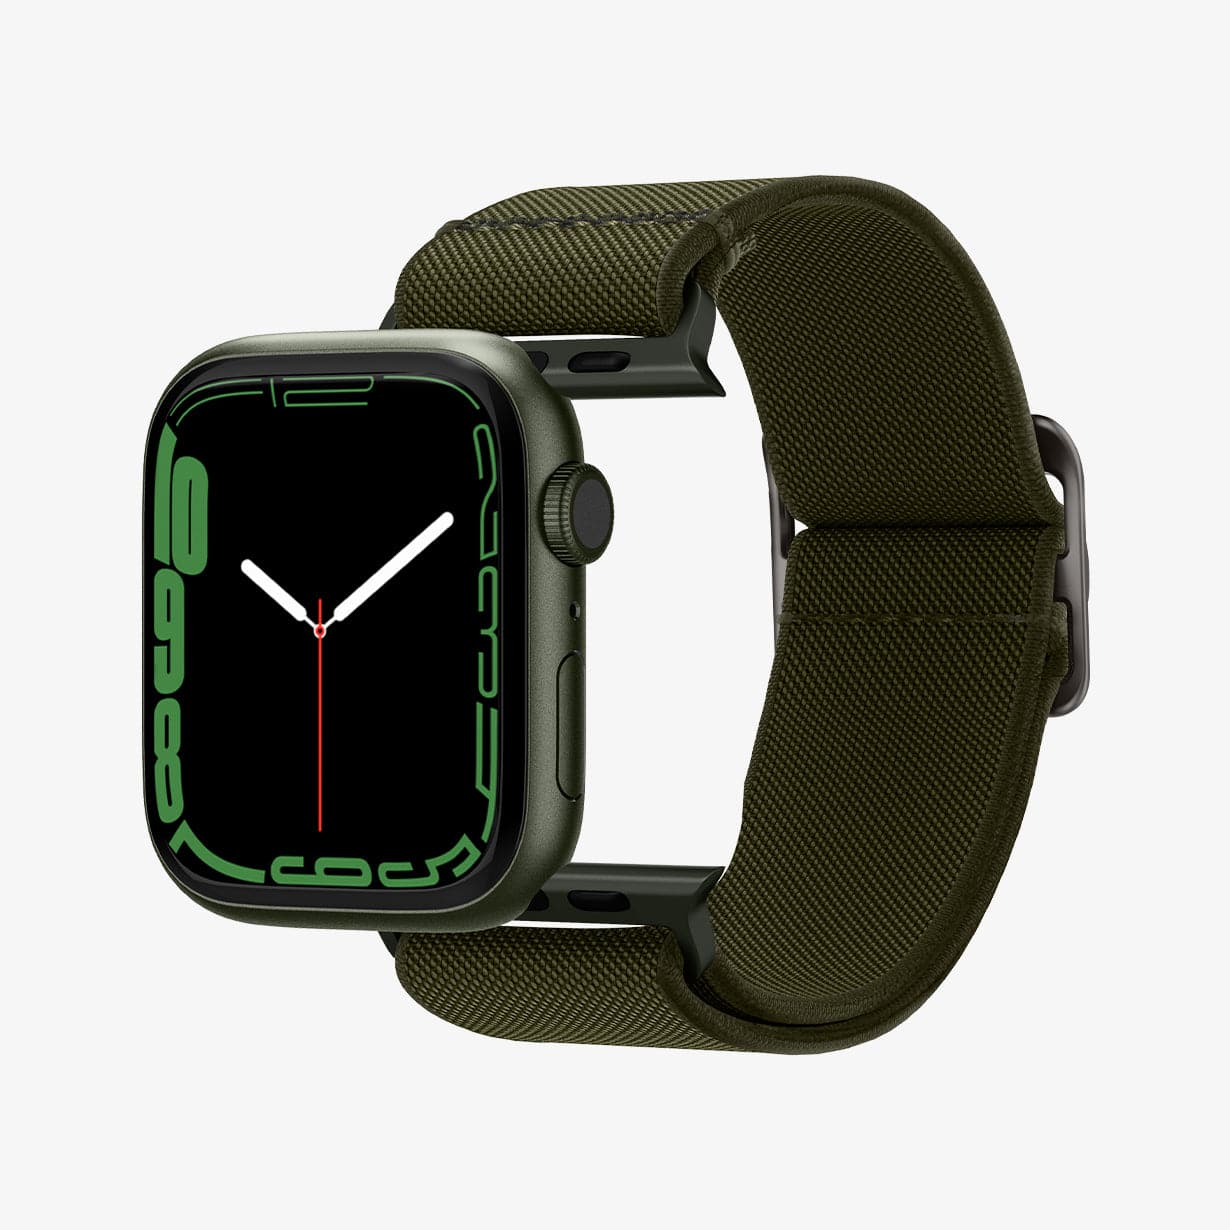 AMP02292 - Apple Watch Series (Apple Watch (41mm)/Apple Watch (38mm)) Watch Band Lite Fit in khaki showing the watch face hovering in front of watch band